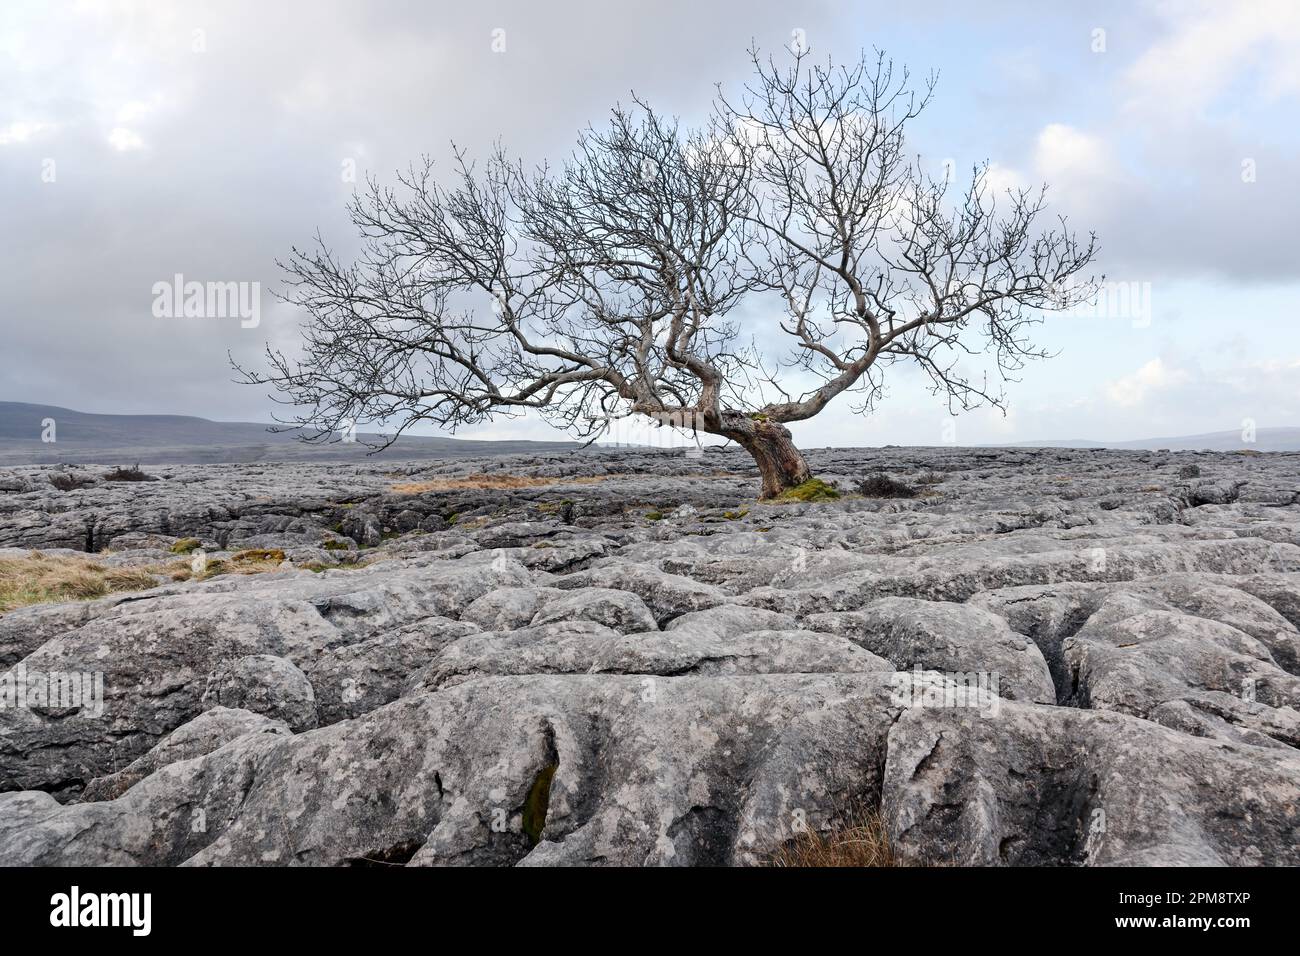 Tree growing out of a limestone pavement, Twisleton, Yorkshire Dales, UK Stock Photo